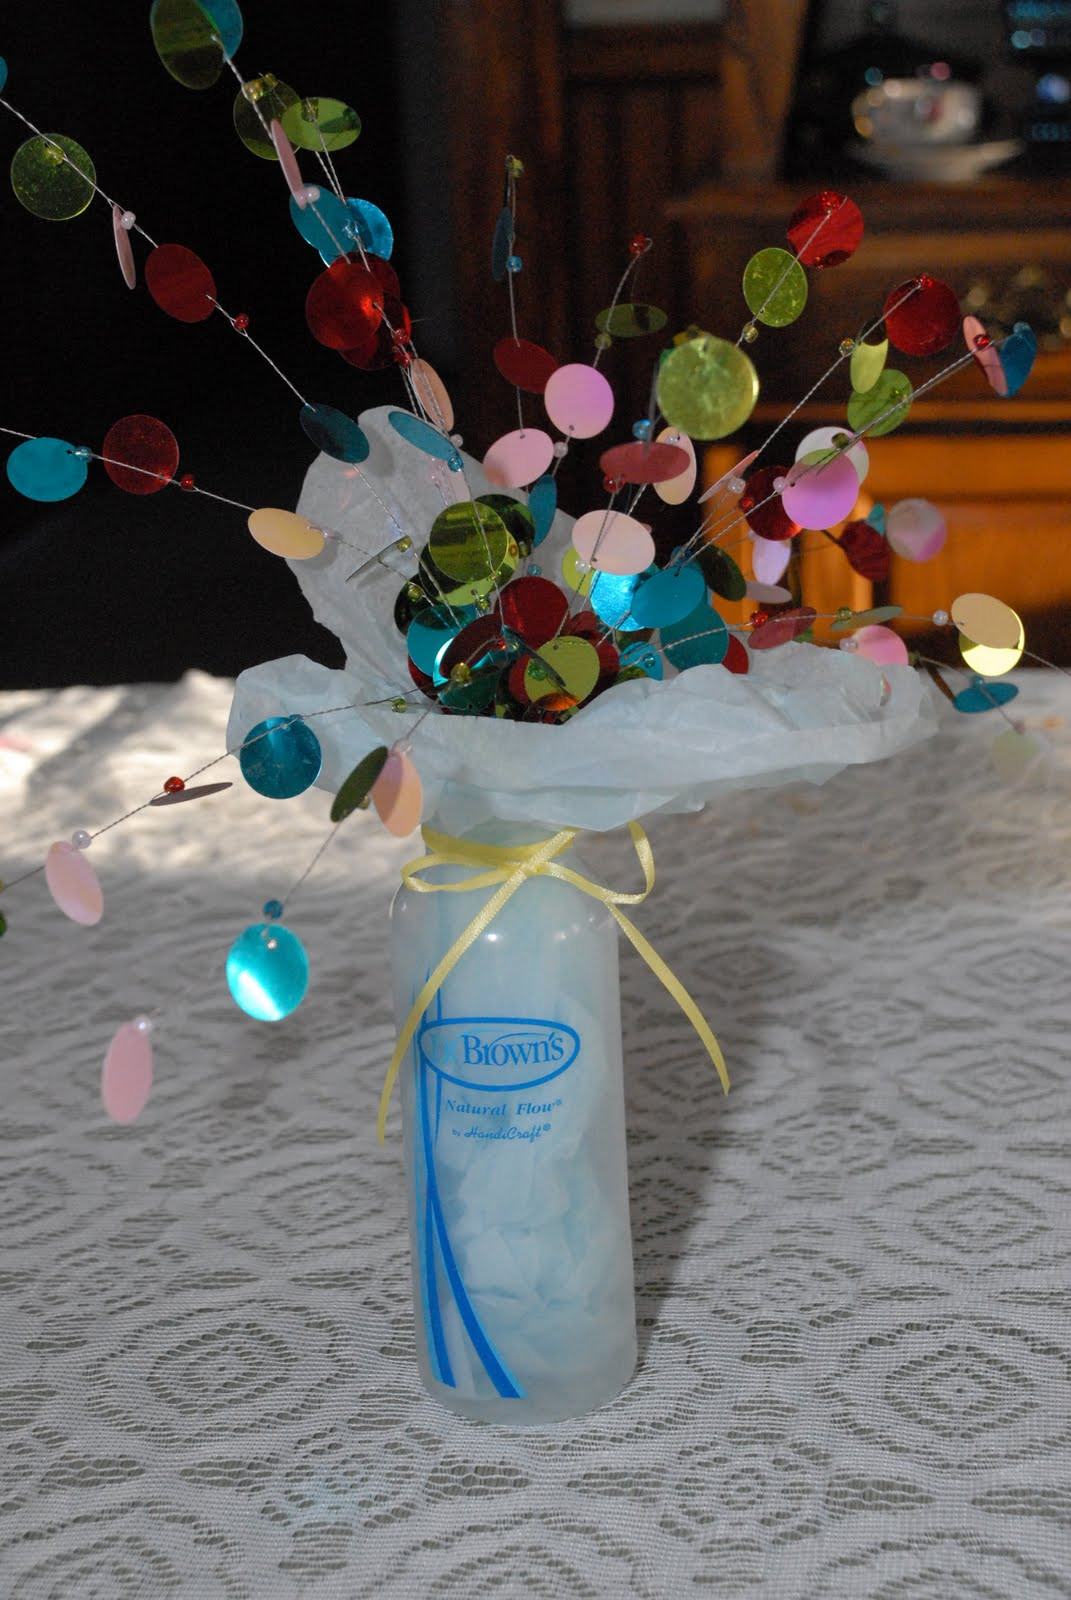 Baby Shower DIY Centerpieces
 Life More Simply DIY Frugal and Green Centerpieces for a